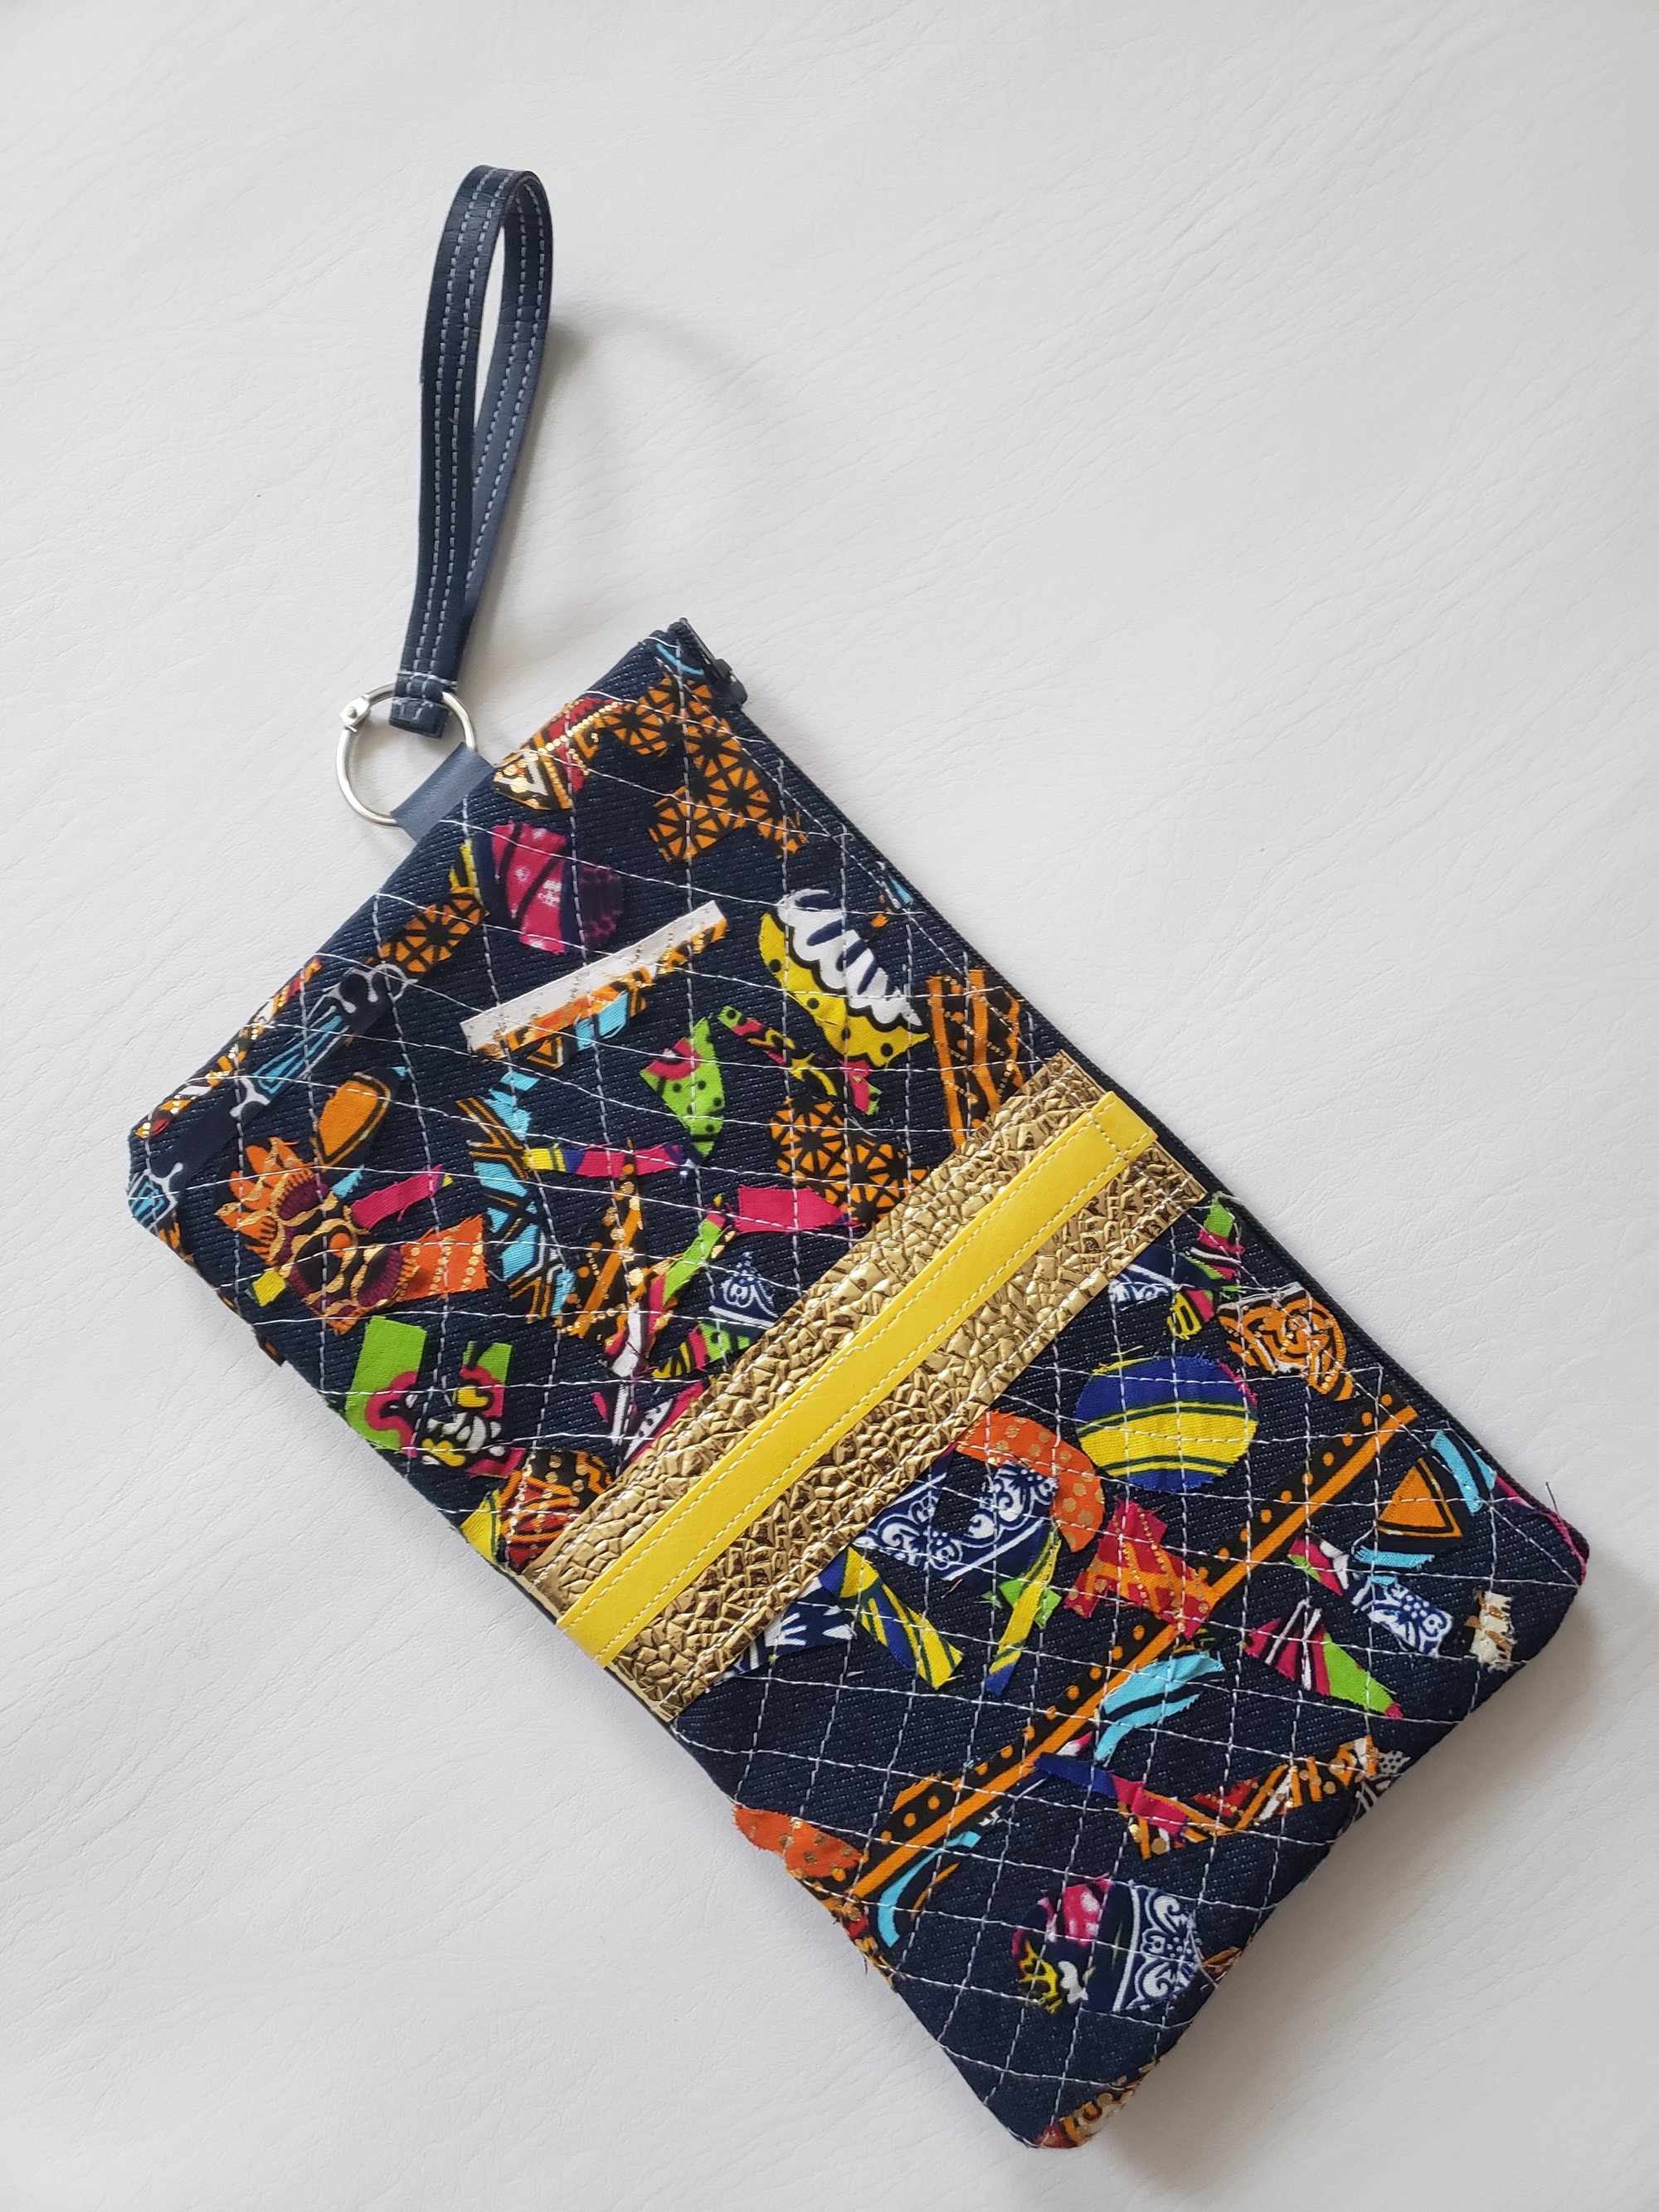 IScream Design — Upcycled clutch with scrap fabric